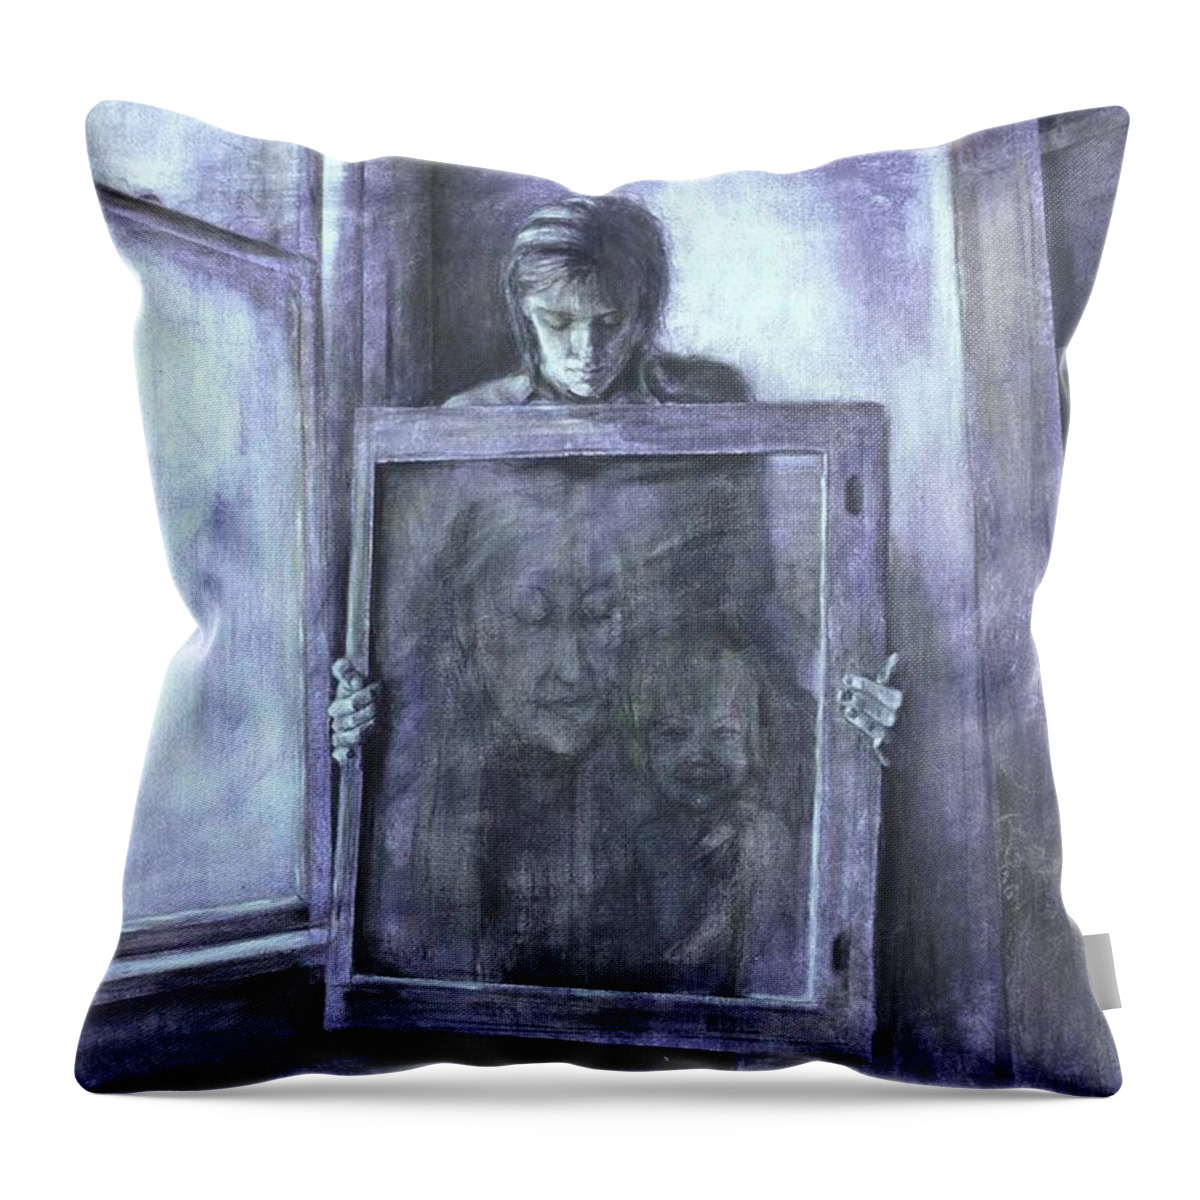 Portrait Throw Pillow featuring the painting Study - Portrait by Janet Zoya